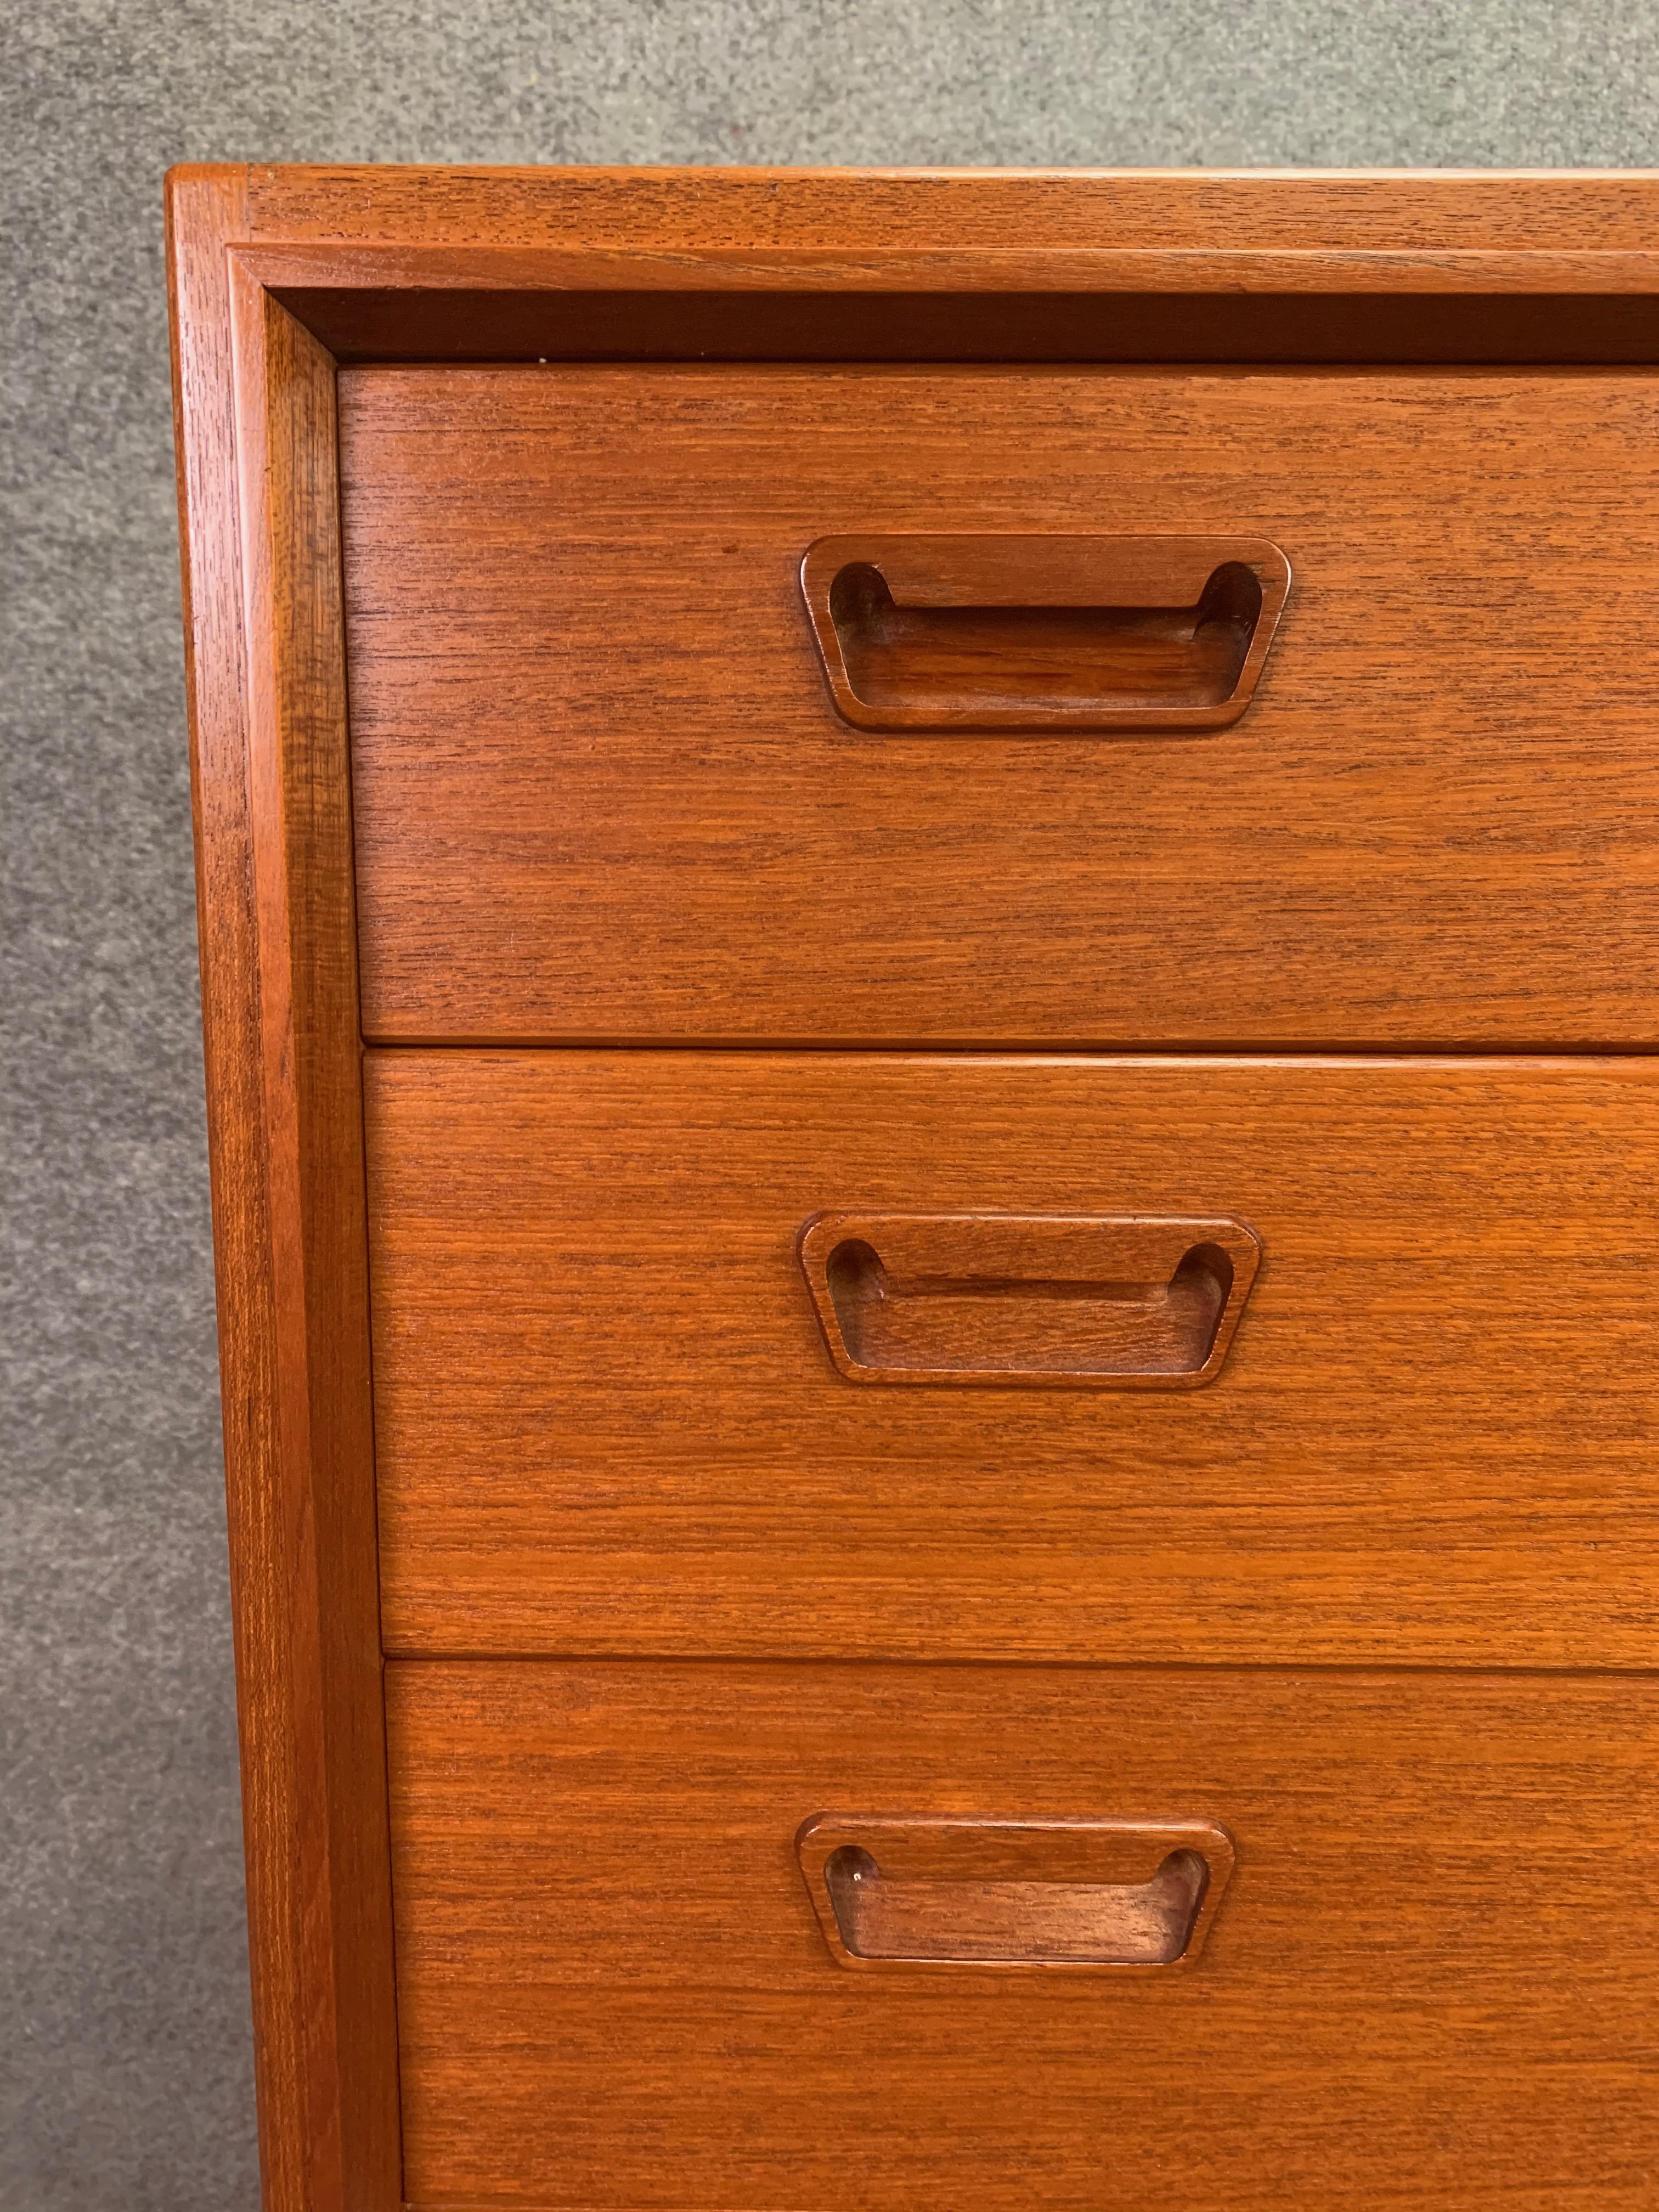 Here is a beautiful Scandinavian Modern highboy dresser in teak manufactured by Munch Møbler Slagelse in Denmark in the 1960s. This dresser, recently imported from Copenhagen to California, has just been cleaned up and oiled and features a vibrant